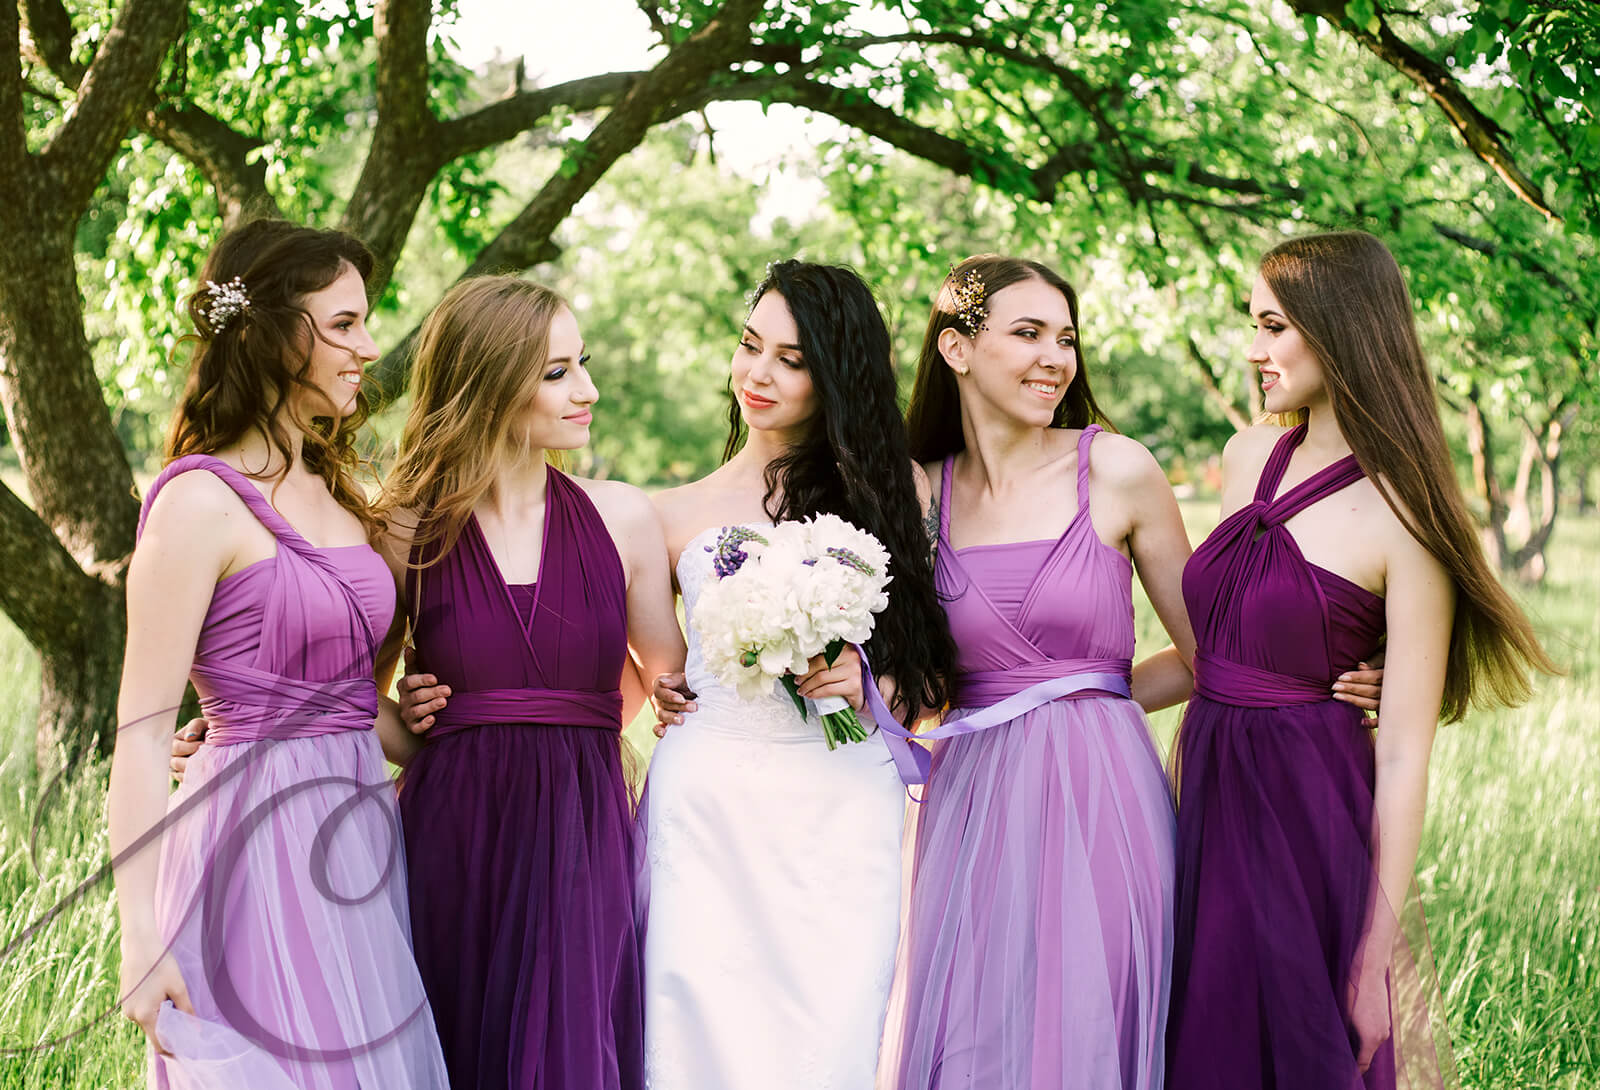 BRIDESMAID’S PERFECT FIT